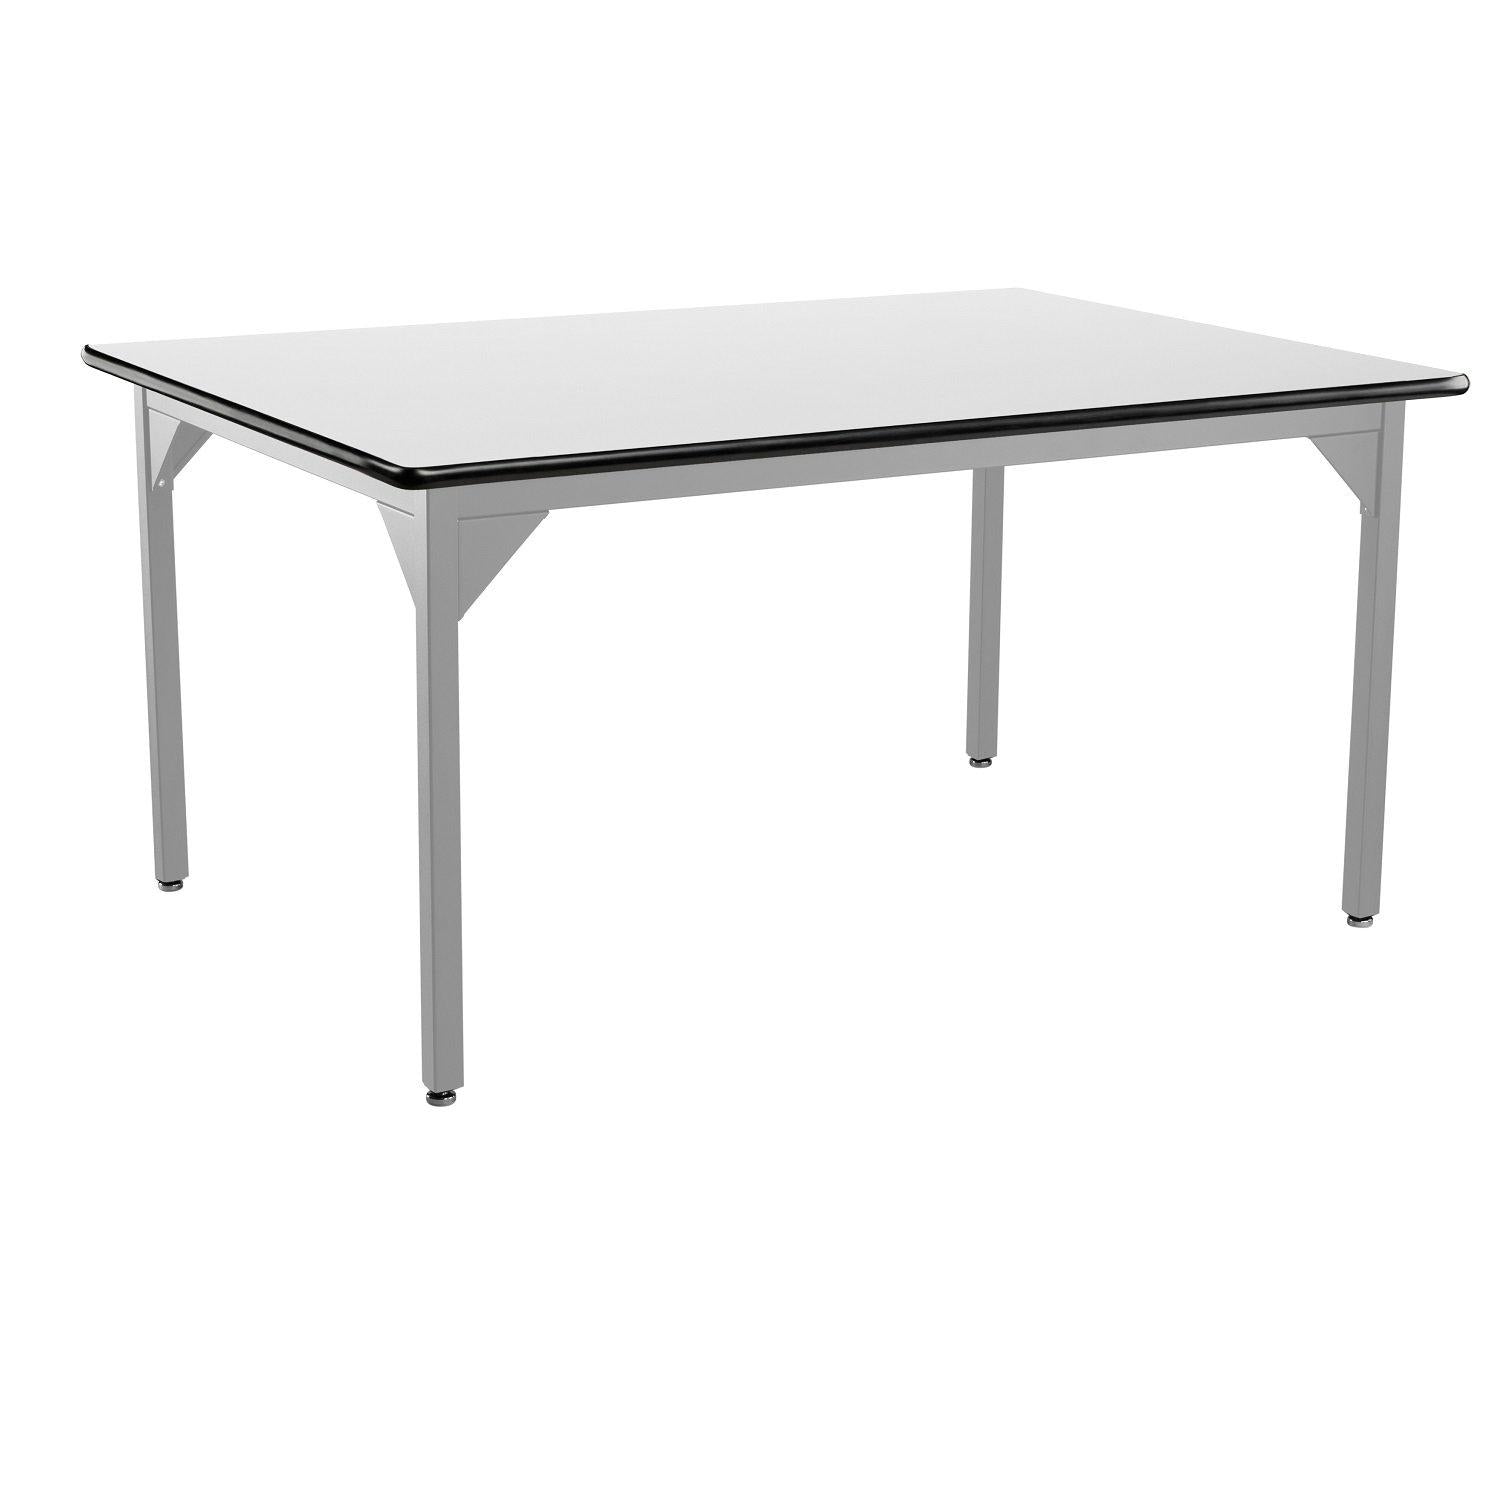 Heavy-Duty Fixed Height Utility Table, Soft Grey Frame, 42" x 60", Whiteboard High-Pressure Laminate Top